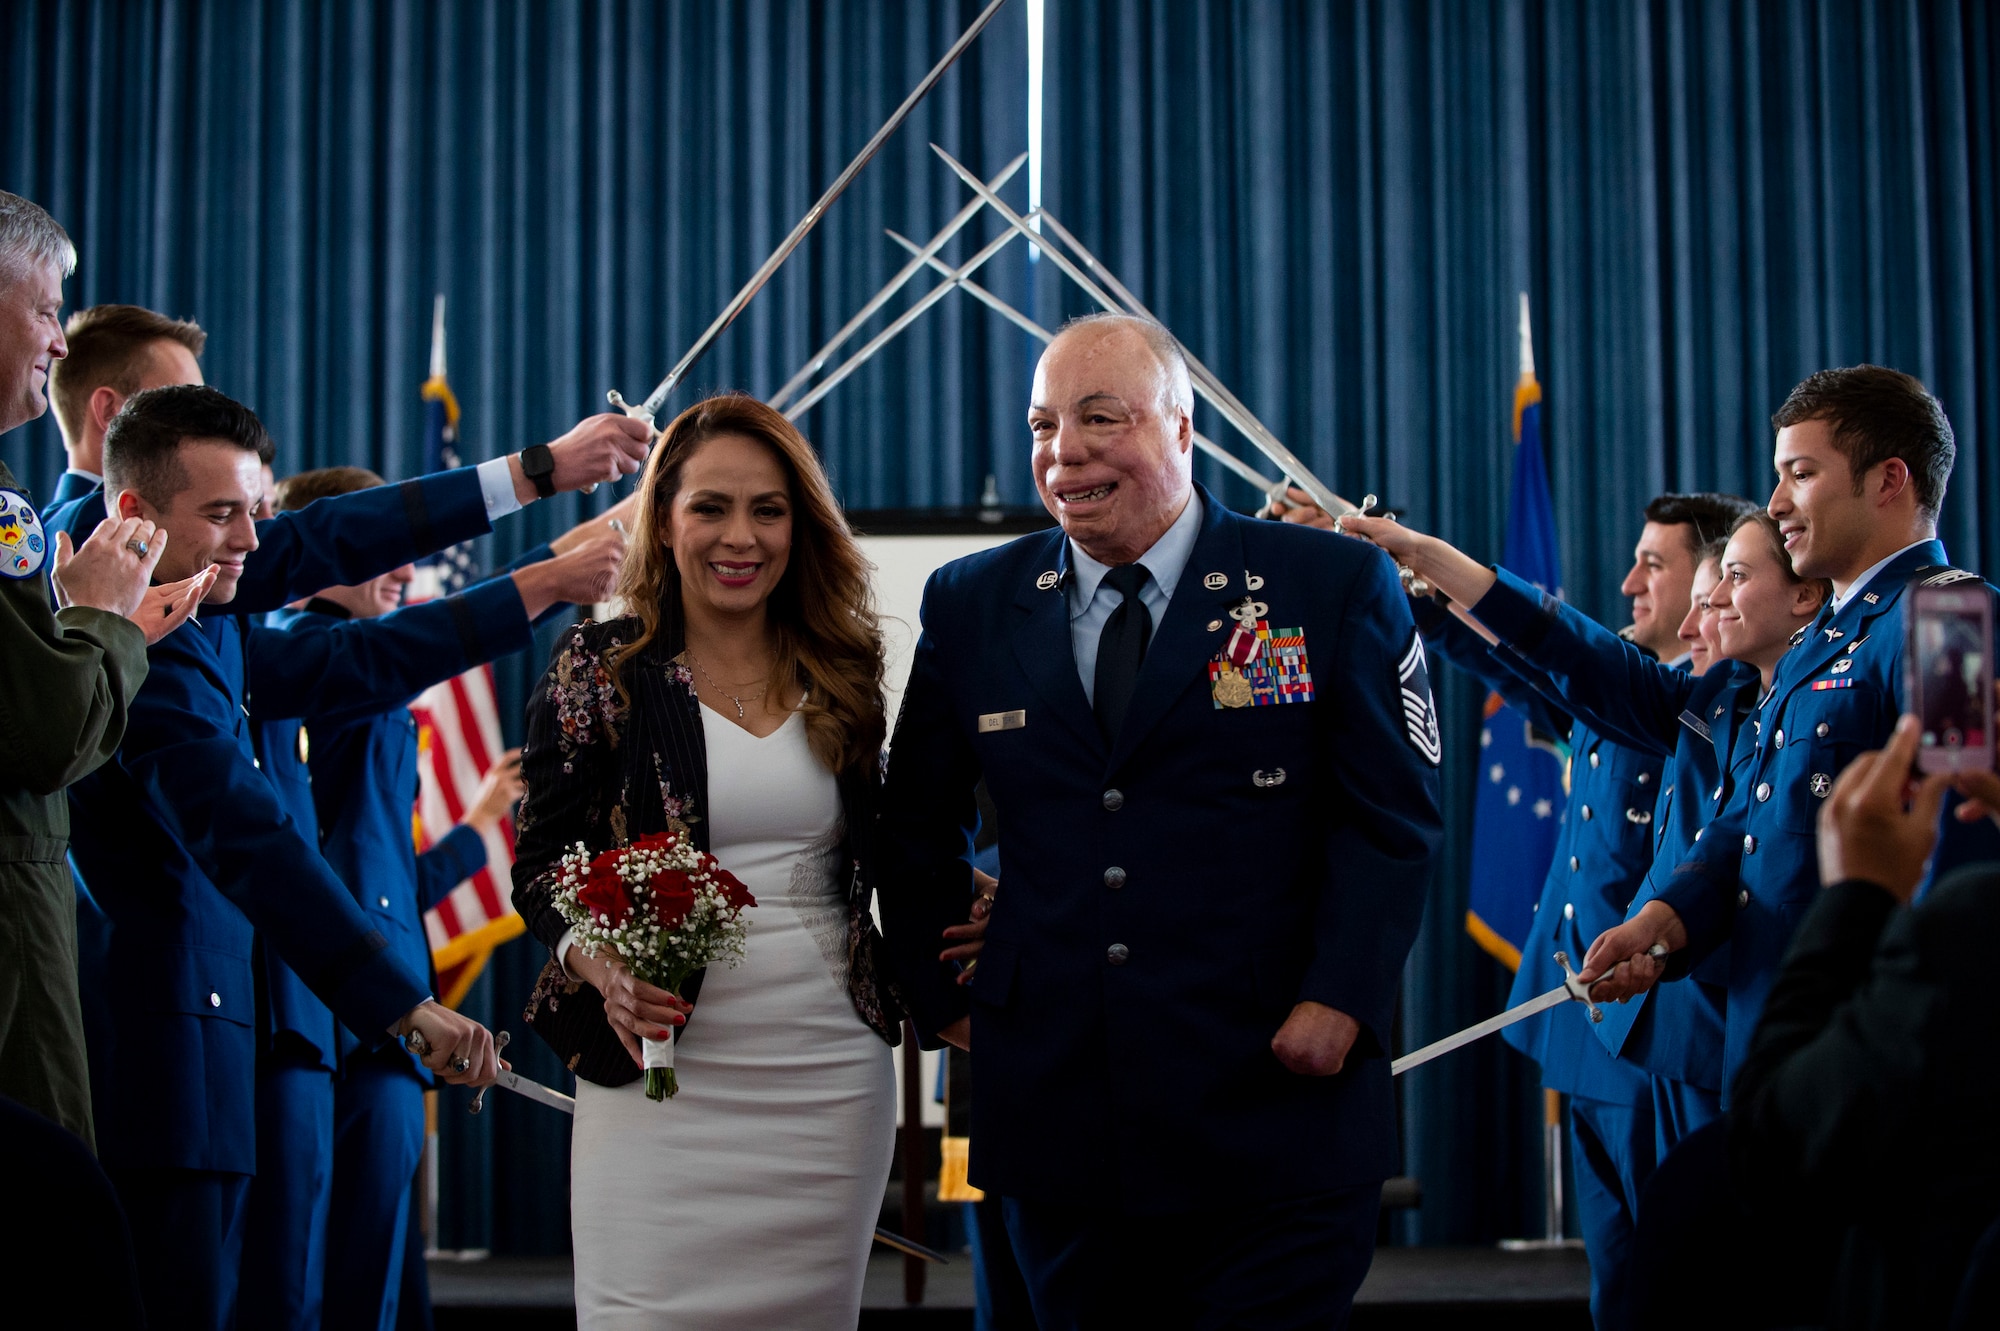 Senior Master Sgt. Israel Del Toro and his wife, Carmen, renew their wedding vows during his retirement ceremony